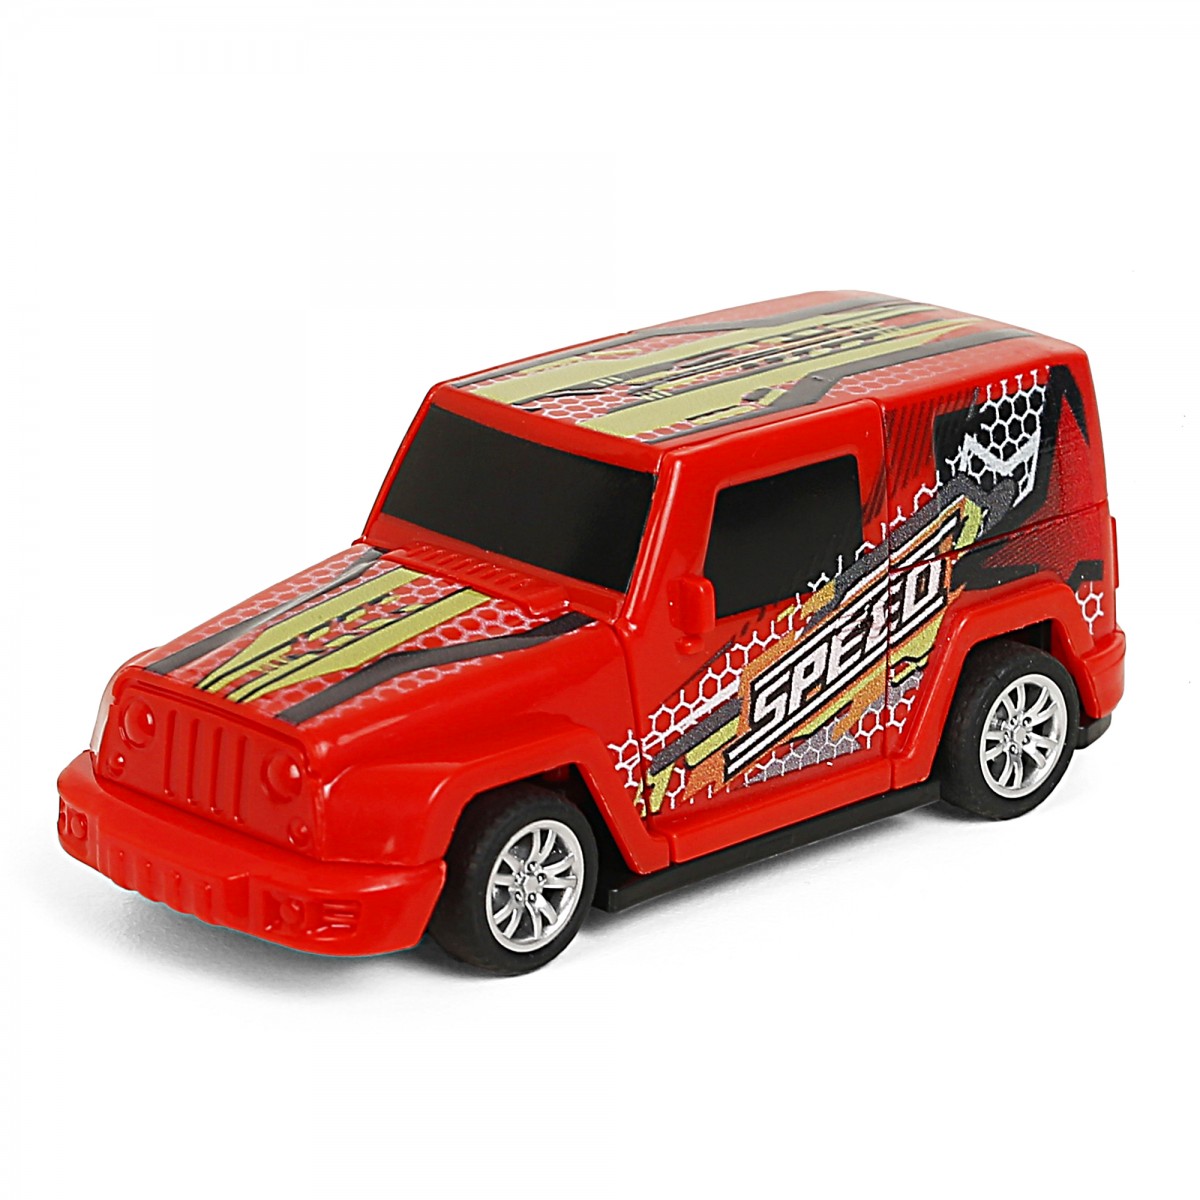 Ralleyz Pull Back Crash Car, 2 Modes Racing Stunt Vehicle Toy, Crash Car, Racing Toy, Friction High Speed Car, Kids for 3Y+, Red